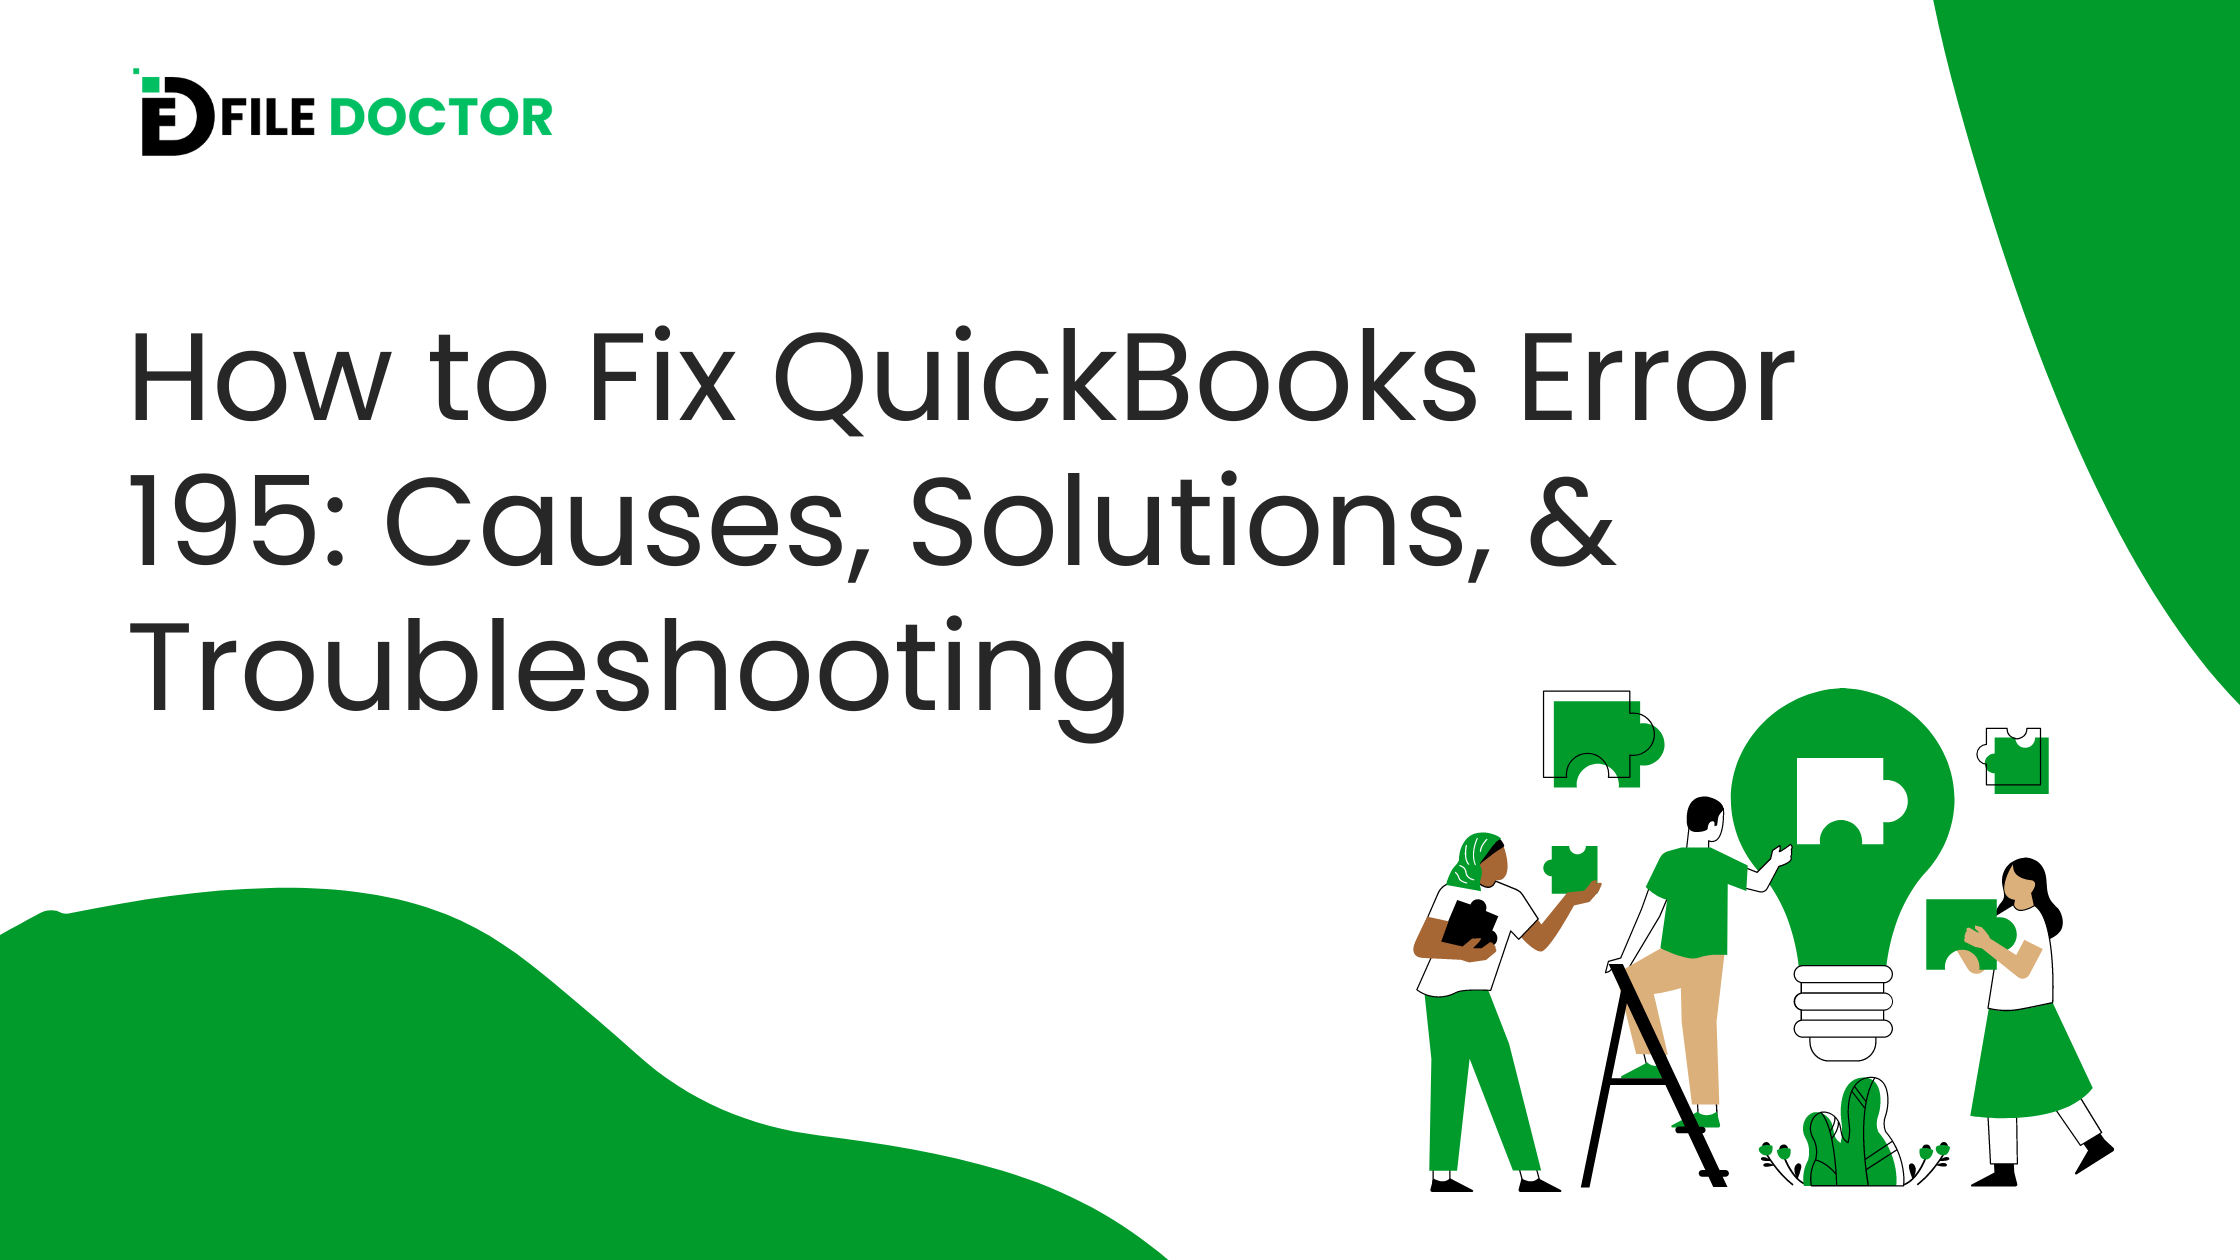 How to  Fix QuickBooks Error 195: Causes, Solutions, & Troubleshooting